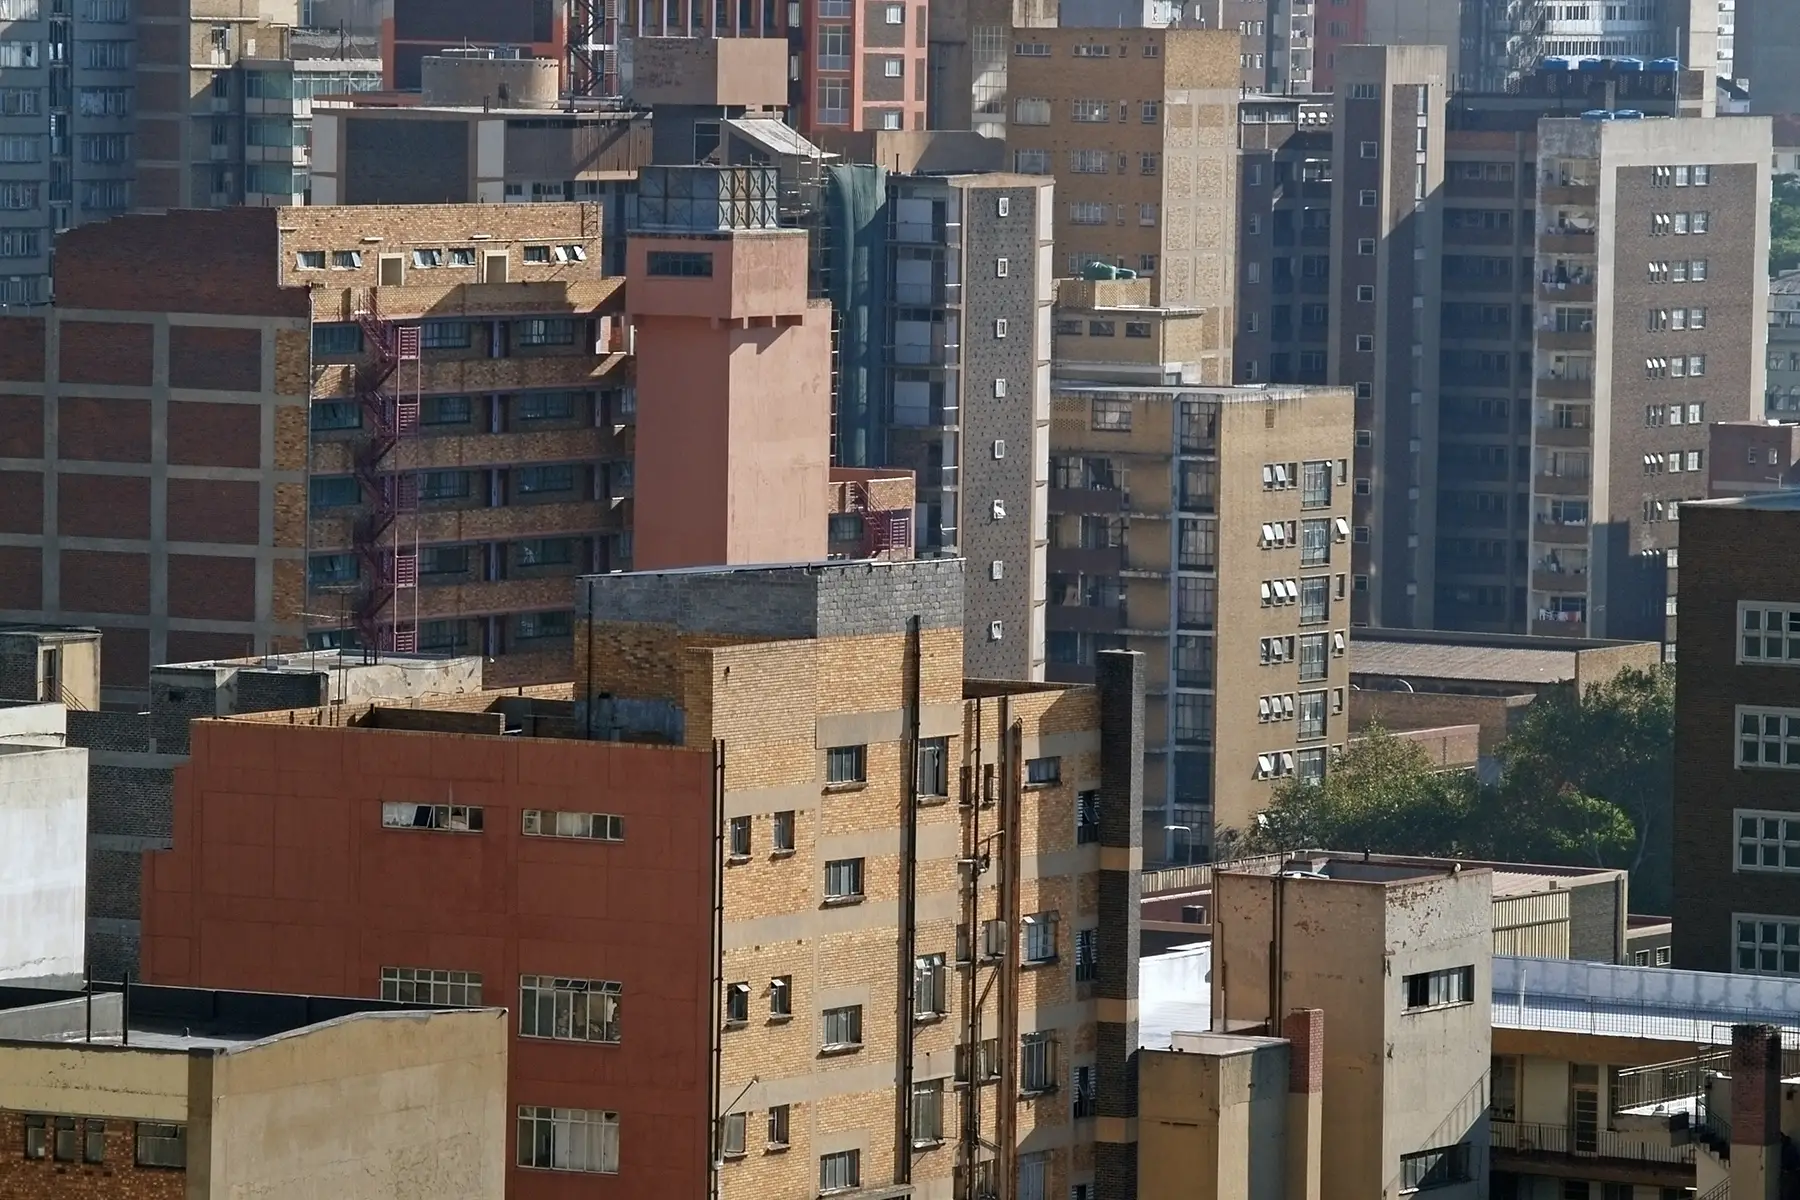 Apartment buildings in Hillbrow, Johannesburg